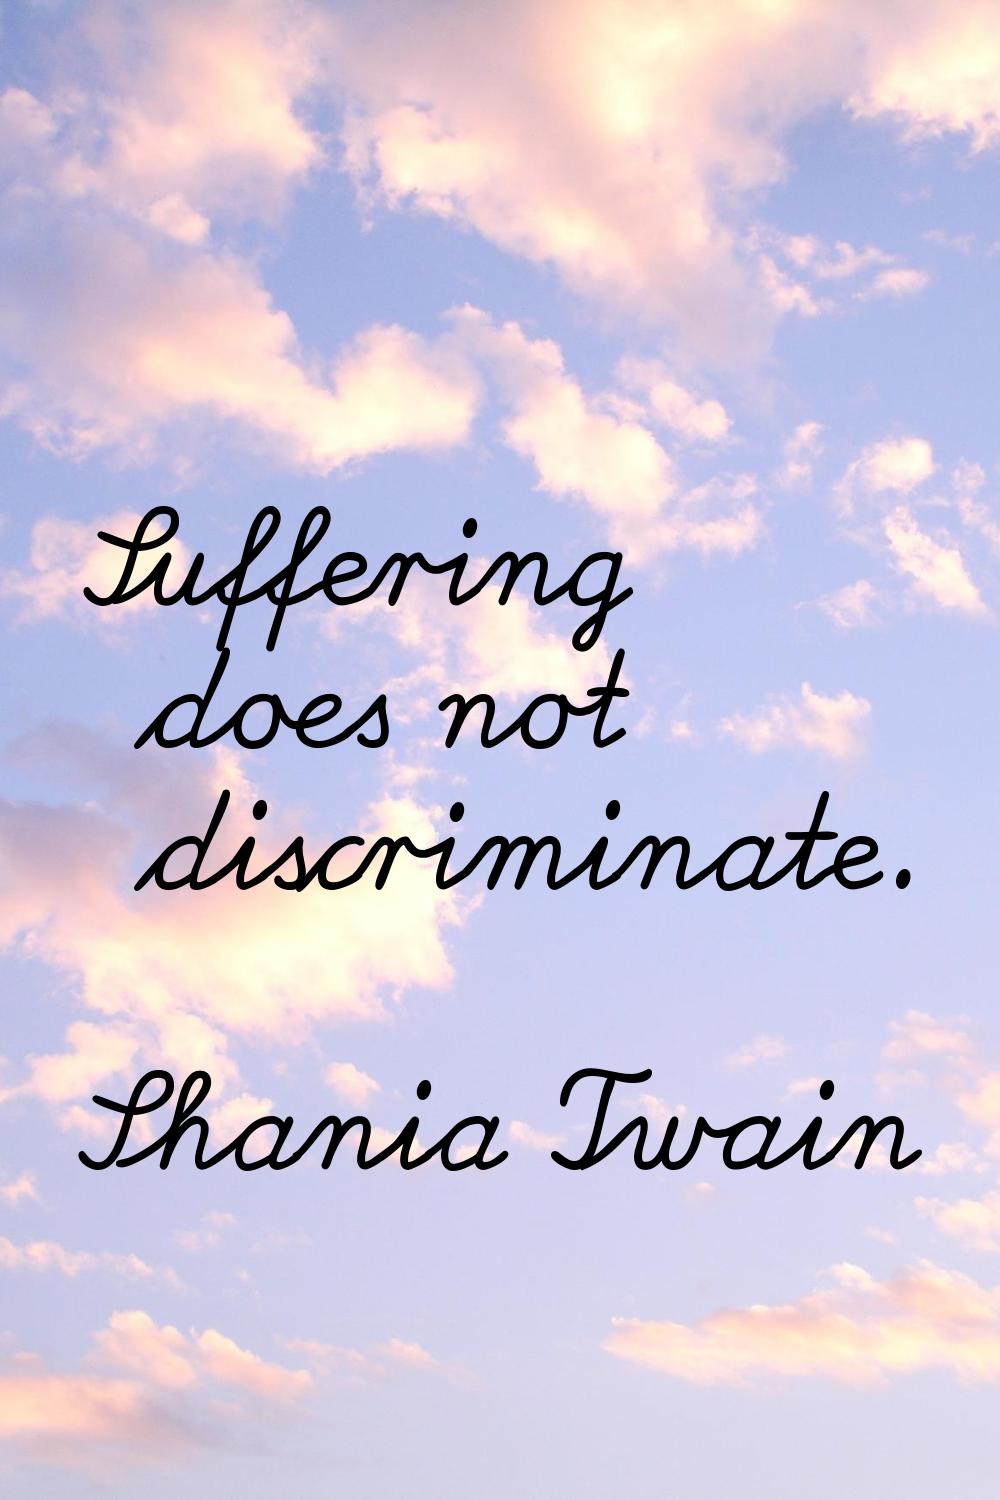 Suffering does not discriminate.